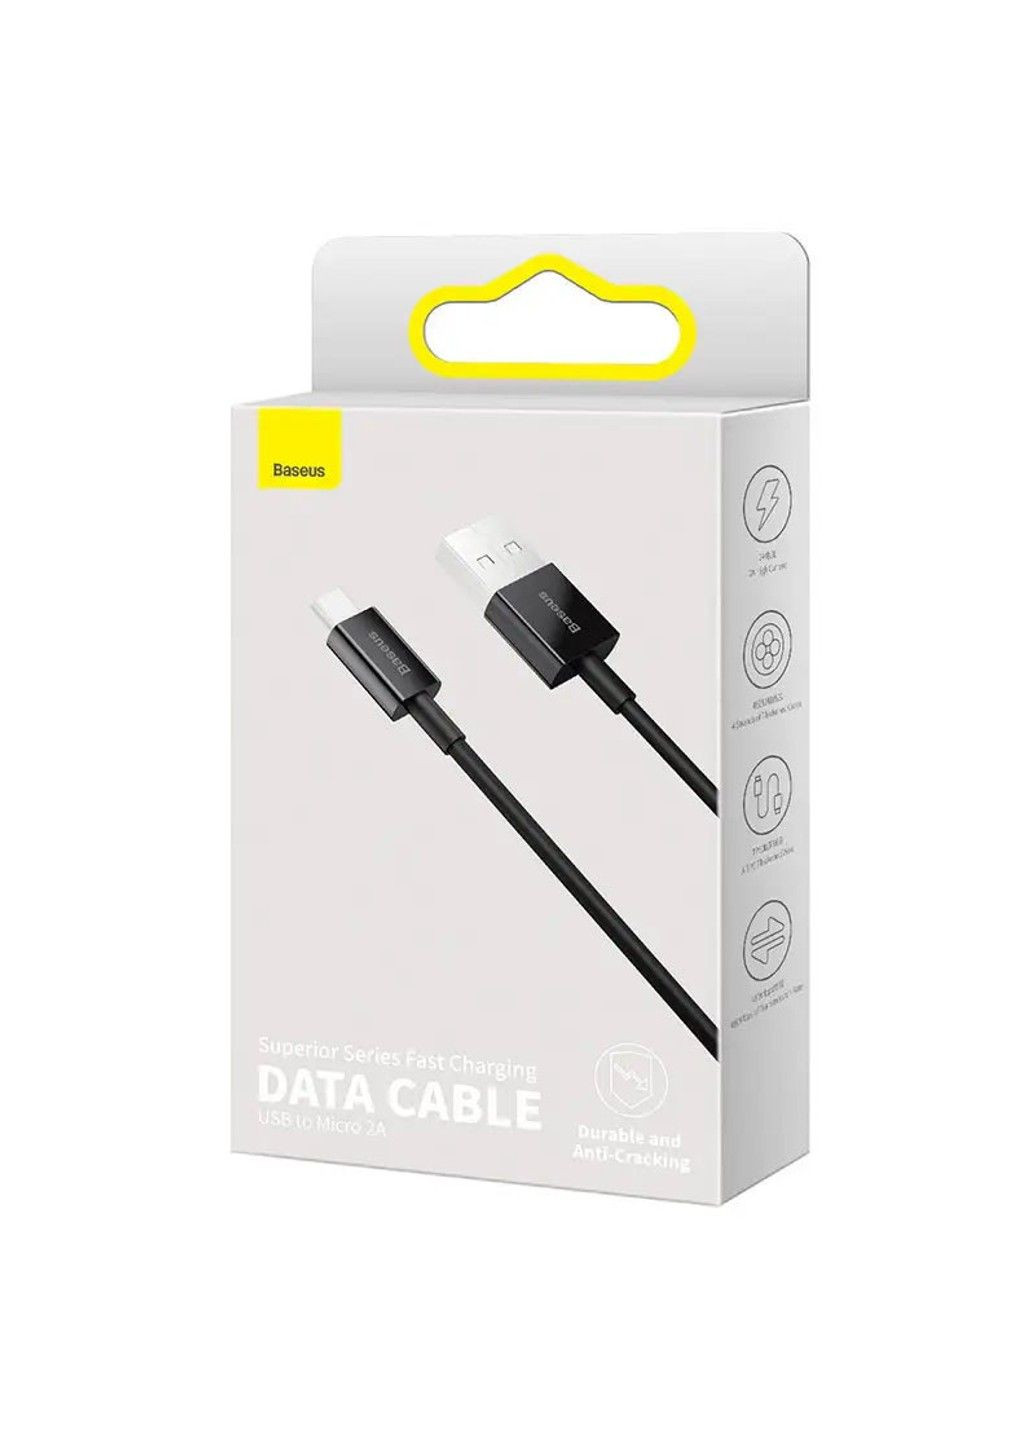 Дата кабель Superior Series Fast Charging MicroUSB Cable 2A (2m) (CAMYS-A) Baseus (294724930)